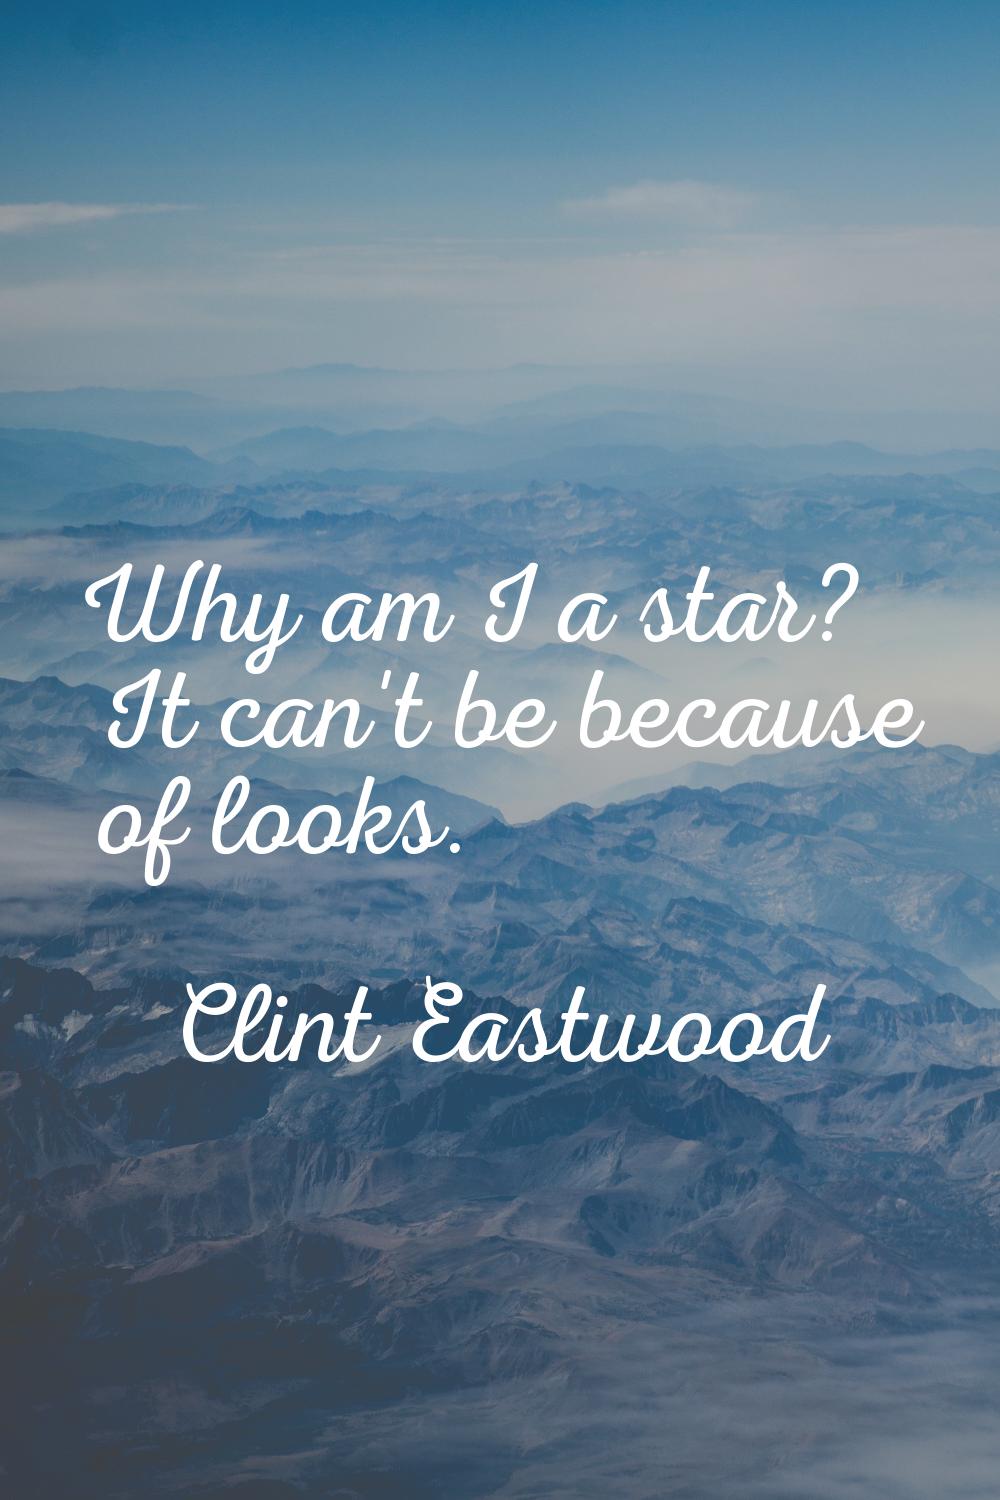 Why am I a star? It can't be because of looks.